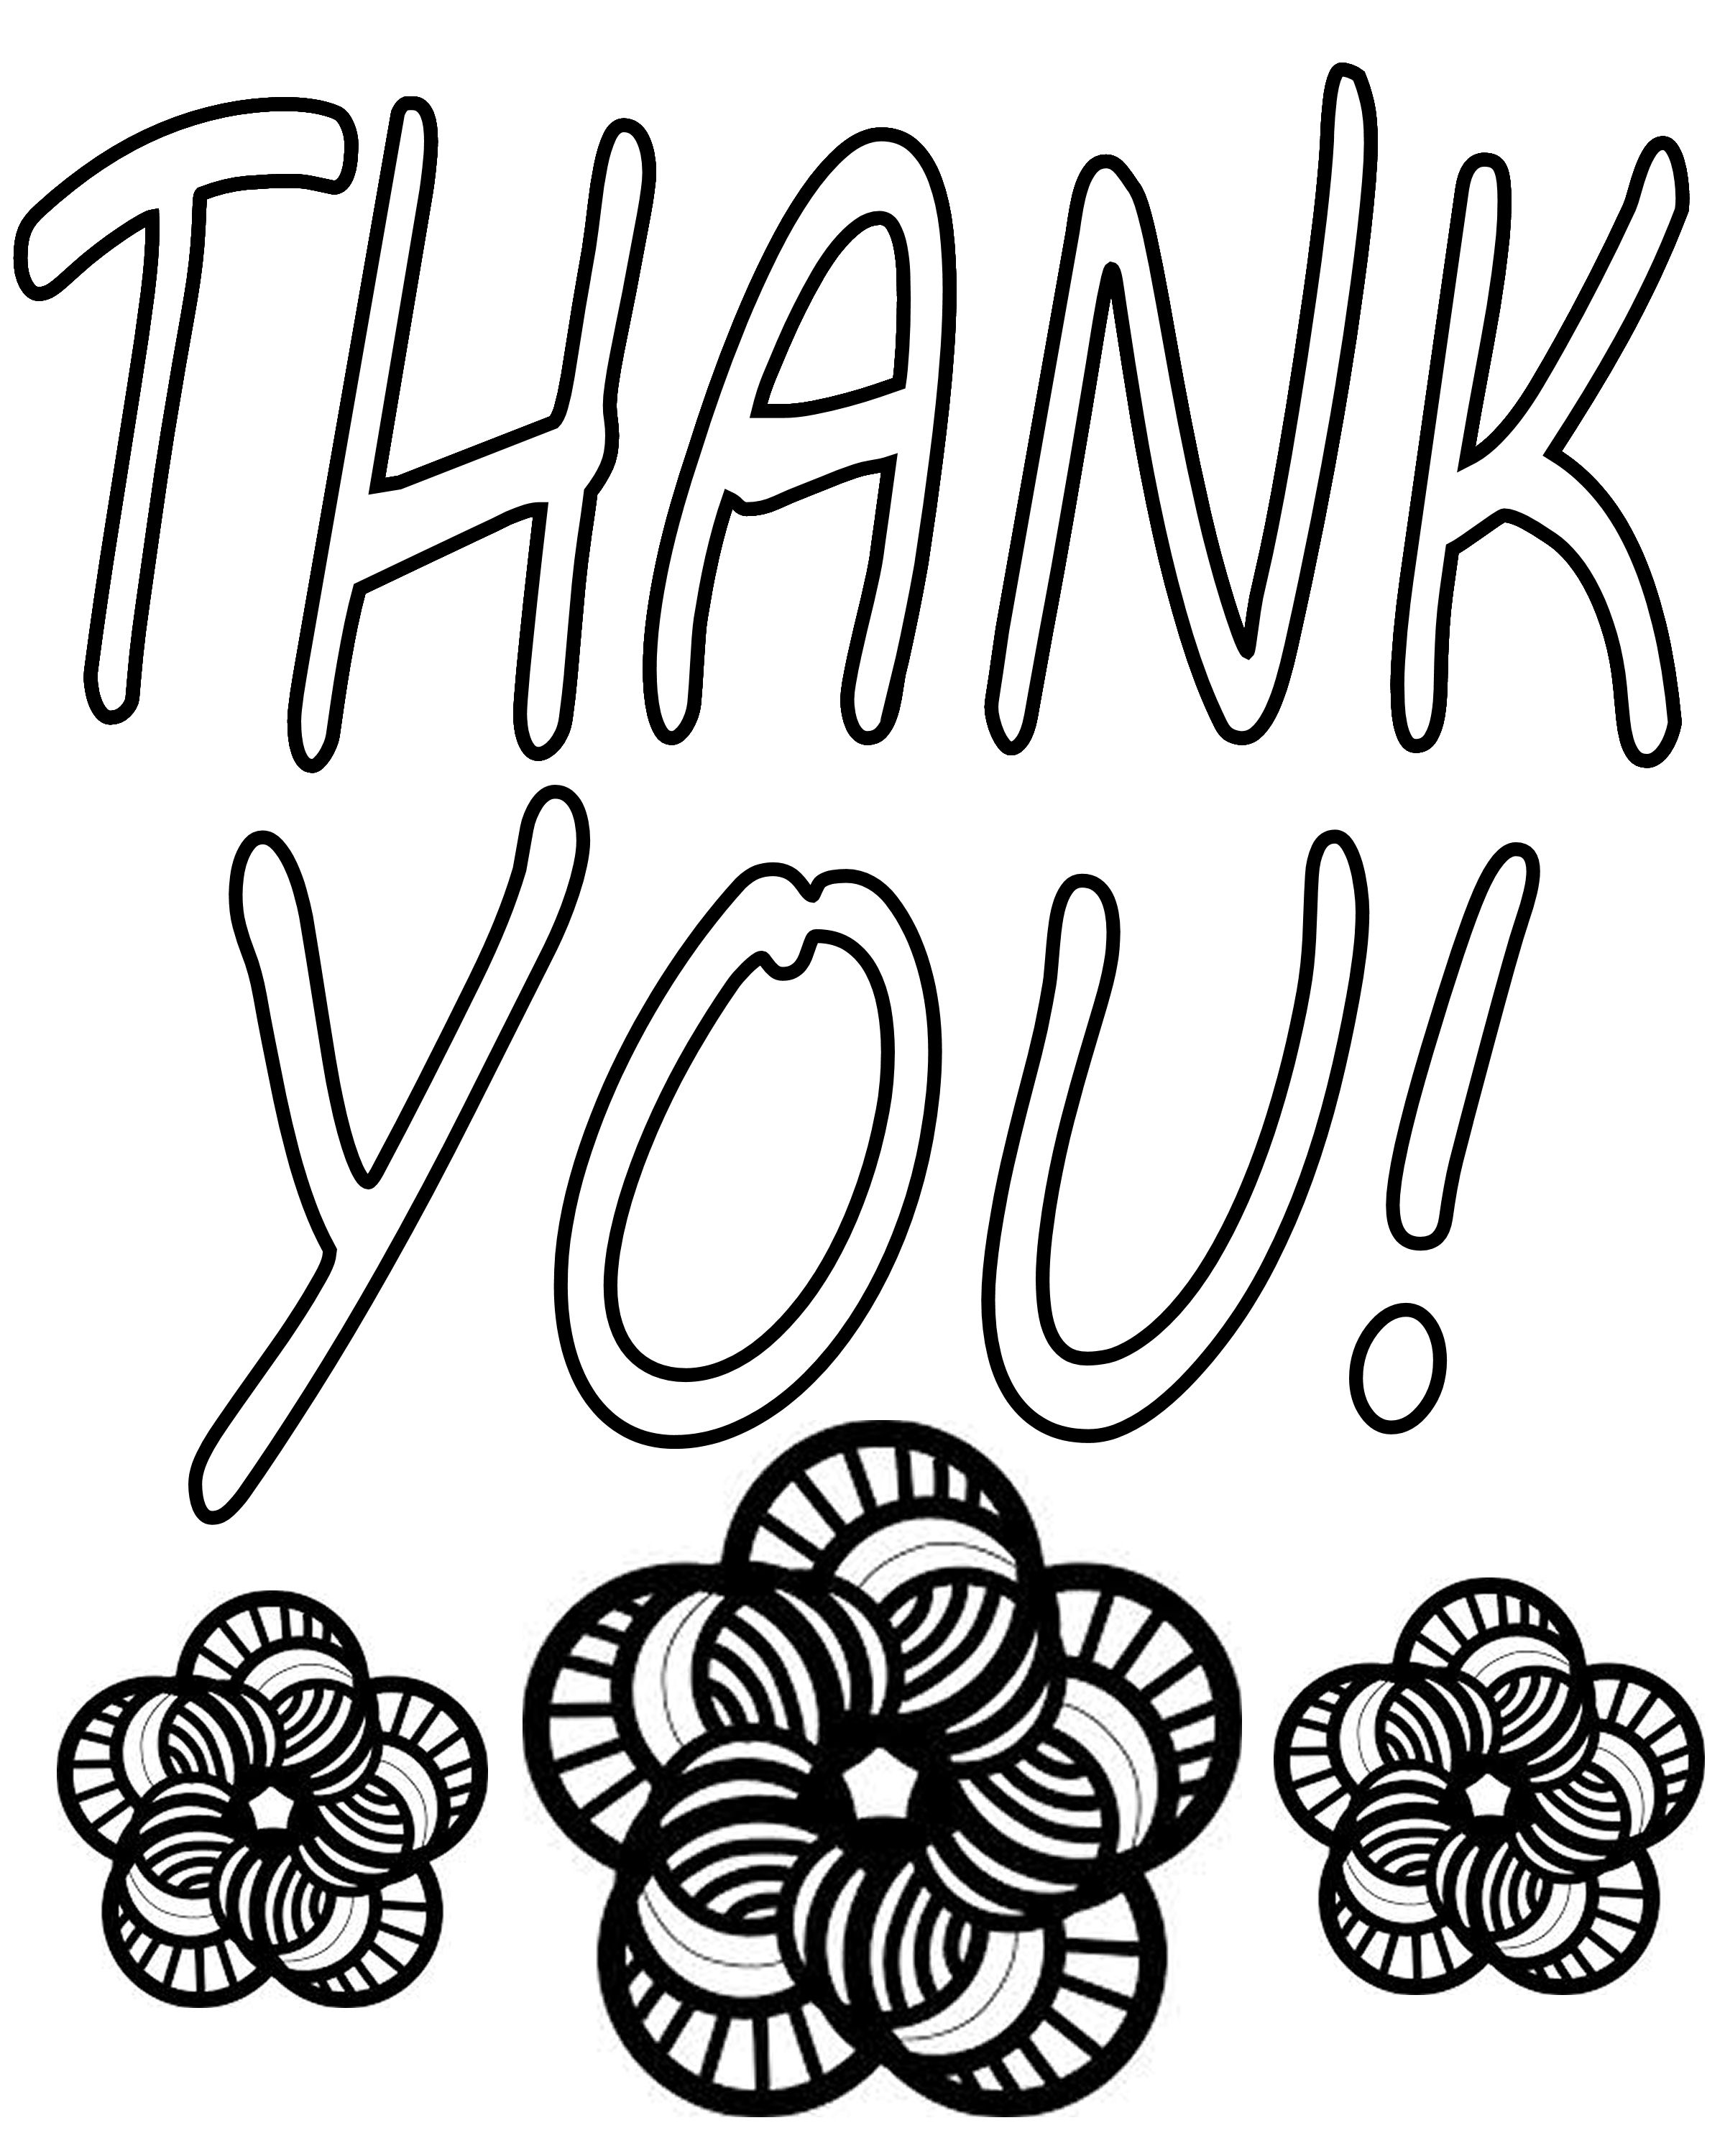 Thank You Coloring Pages - Get Coloring Pages